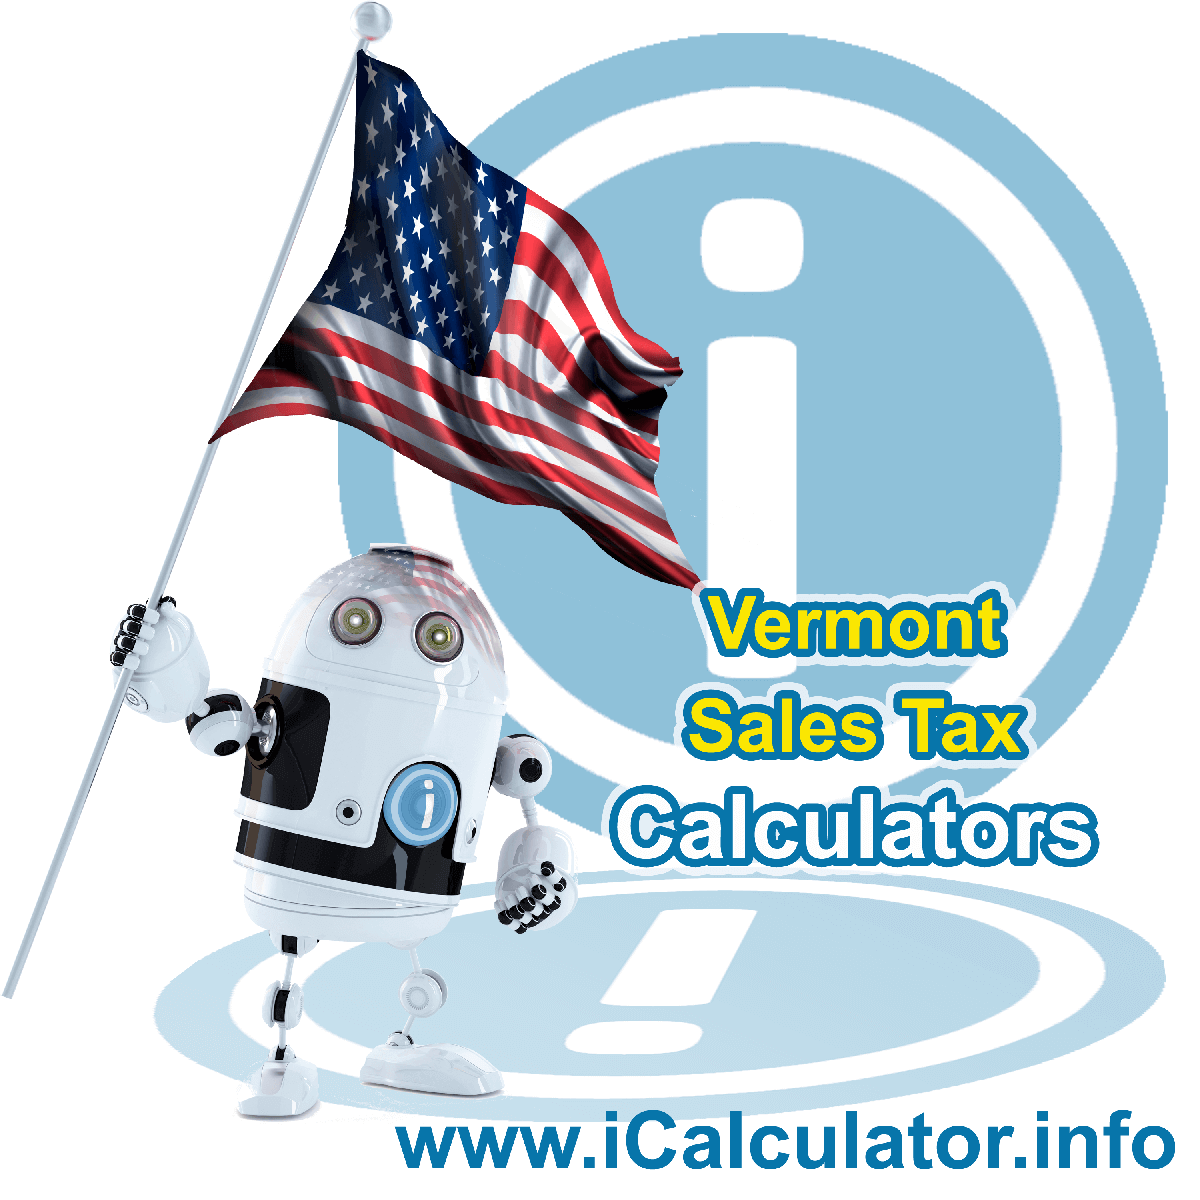 Colchester Sales Rates: This image illustrates a calculator robot calculating Colchester sales tax manually using the Colchester Sales Tax Formula. You can use this information to calculate Colchester Sales Tax manually or use the Colchester Sales Tax Calculator to calculate sales tax online.